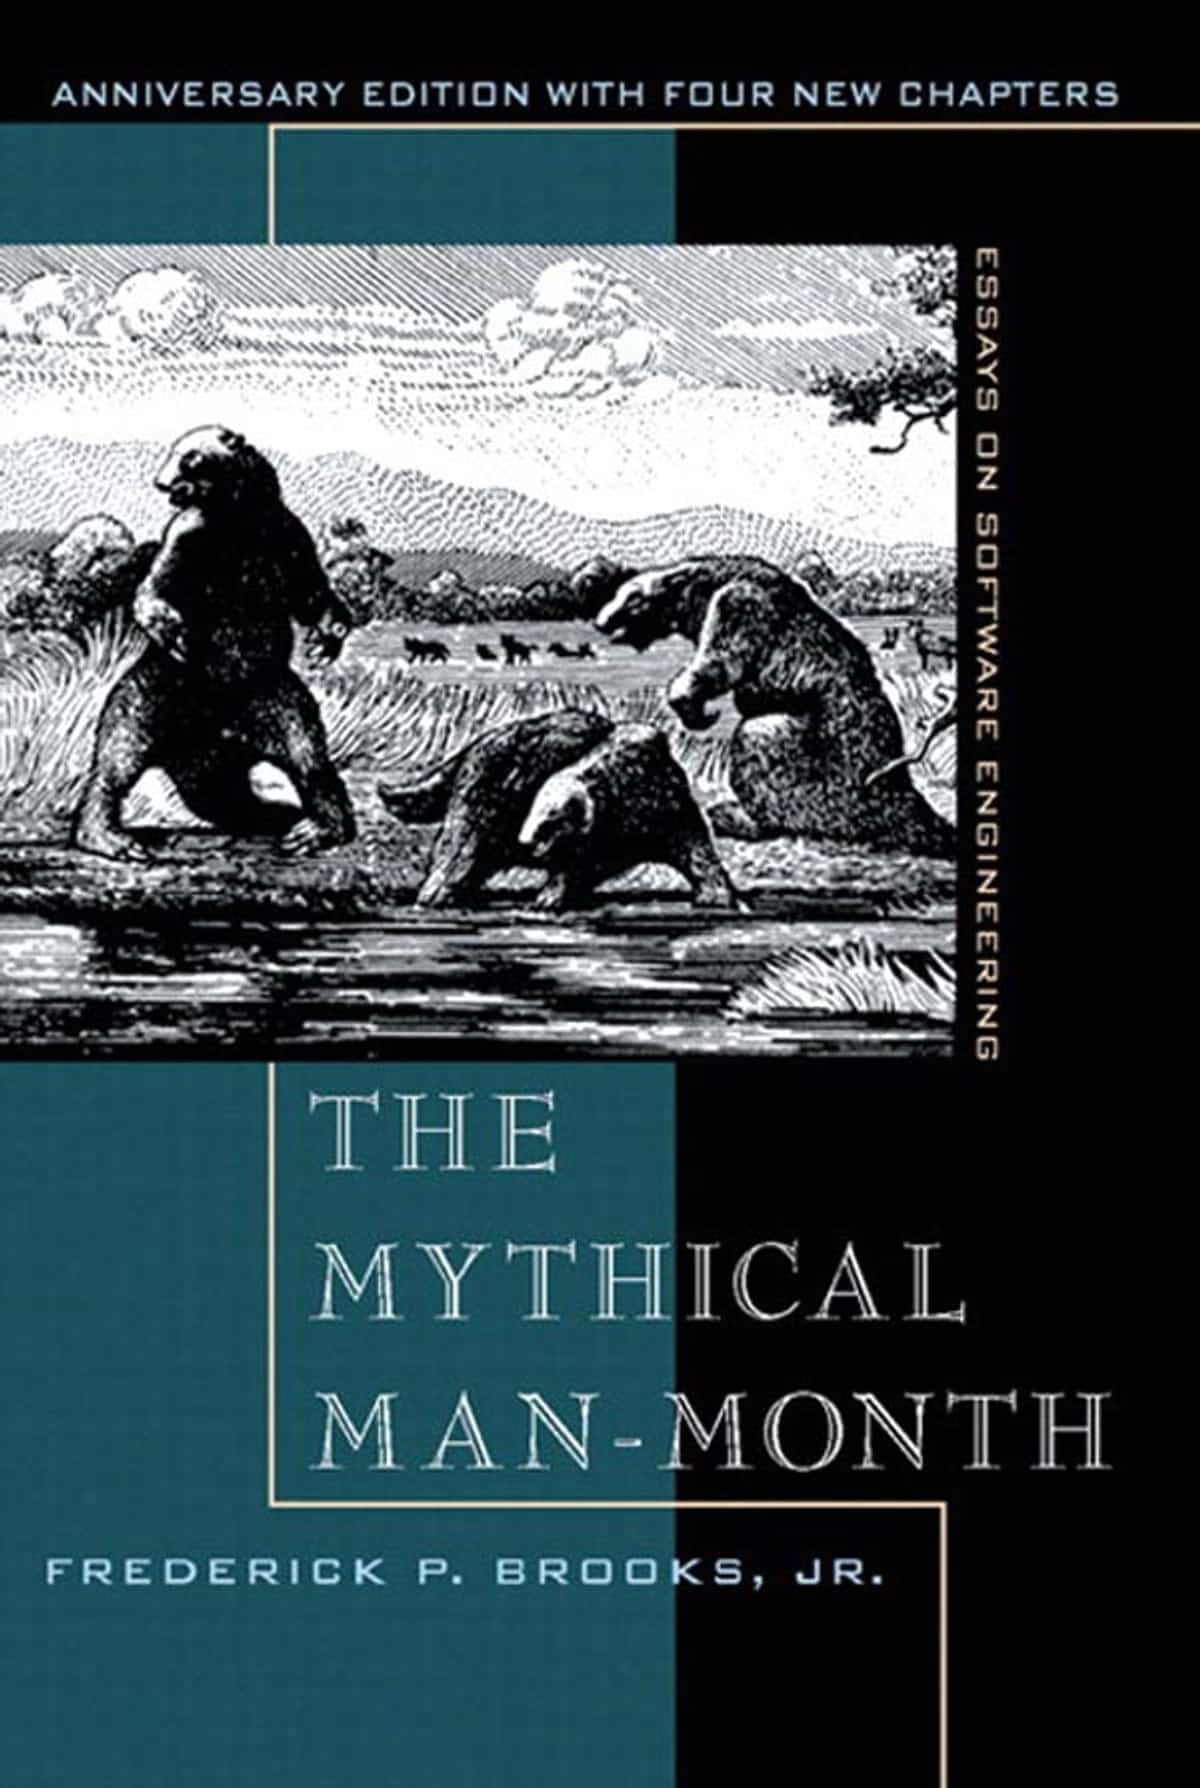 Book cover of "The Mythical Man-Month: Essays on Software Engineering"